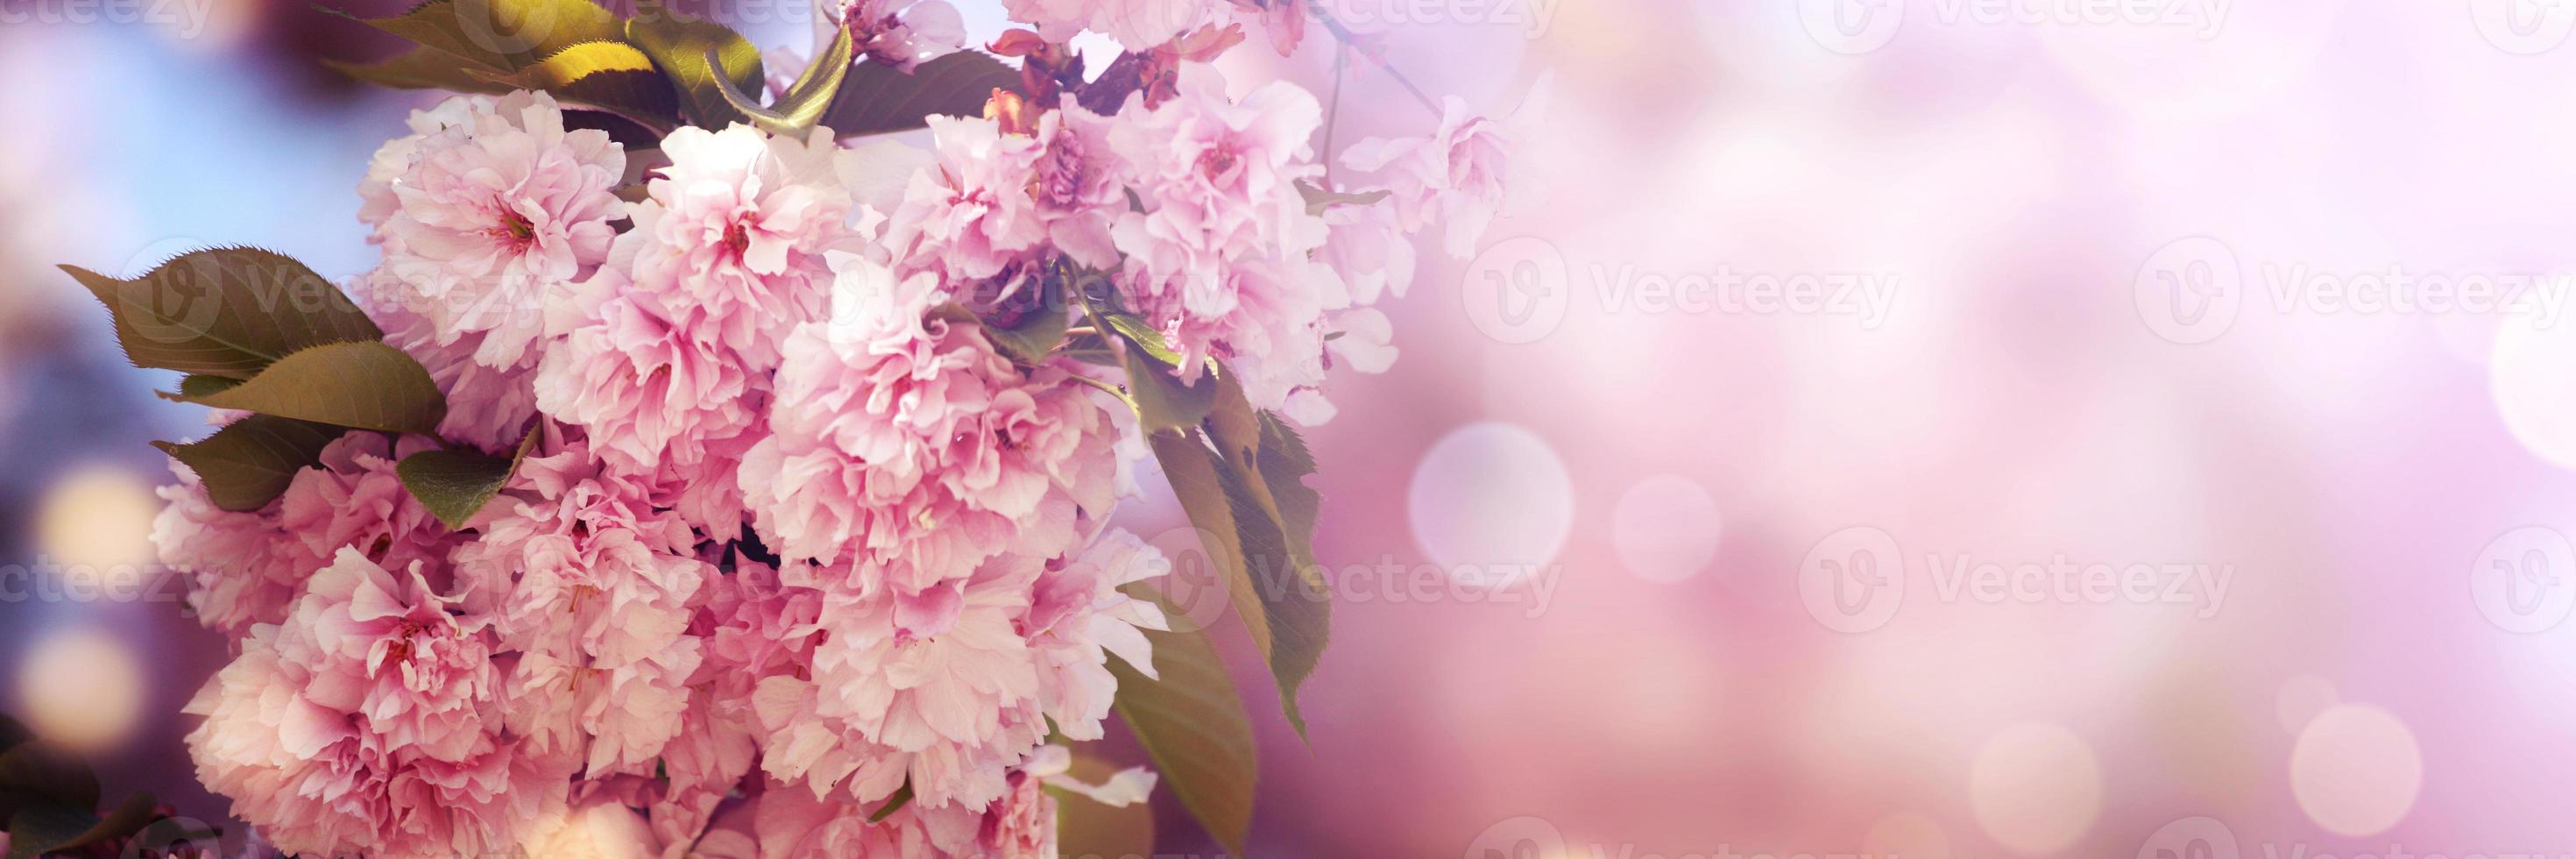 Beautiful branch of blossoming tree in spring. photo